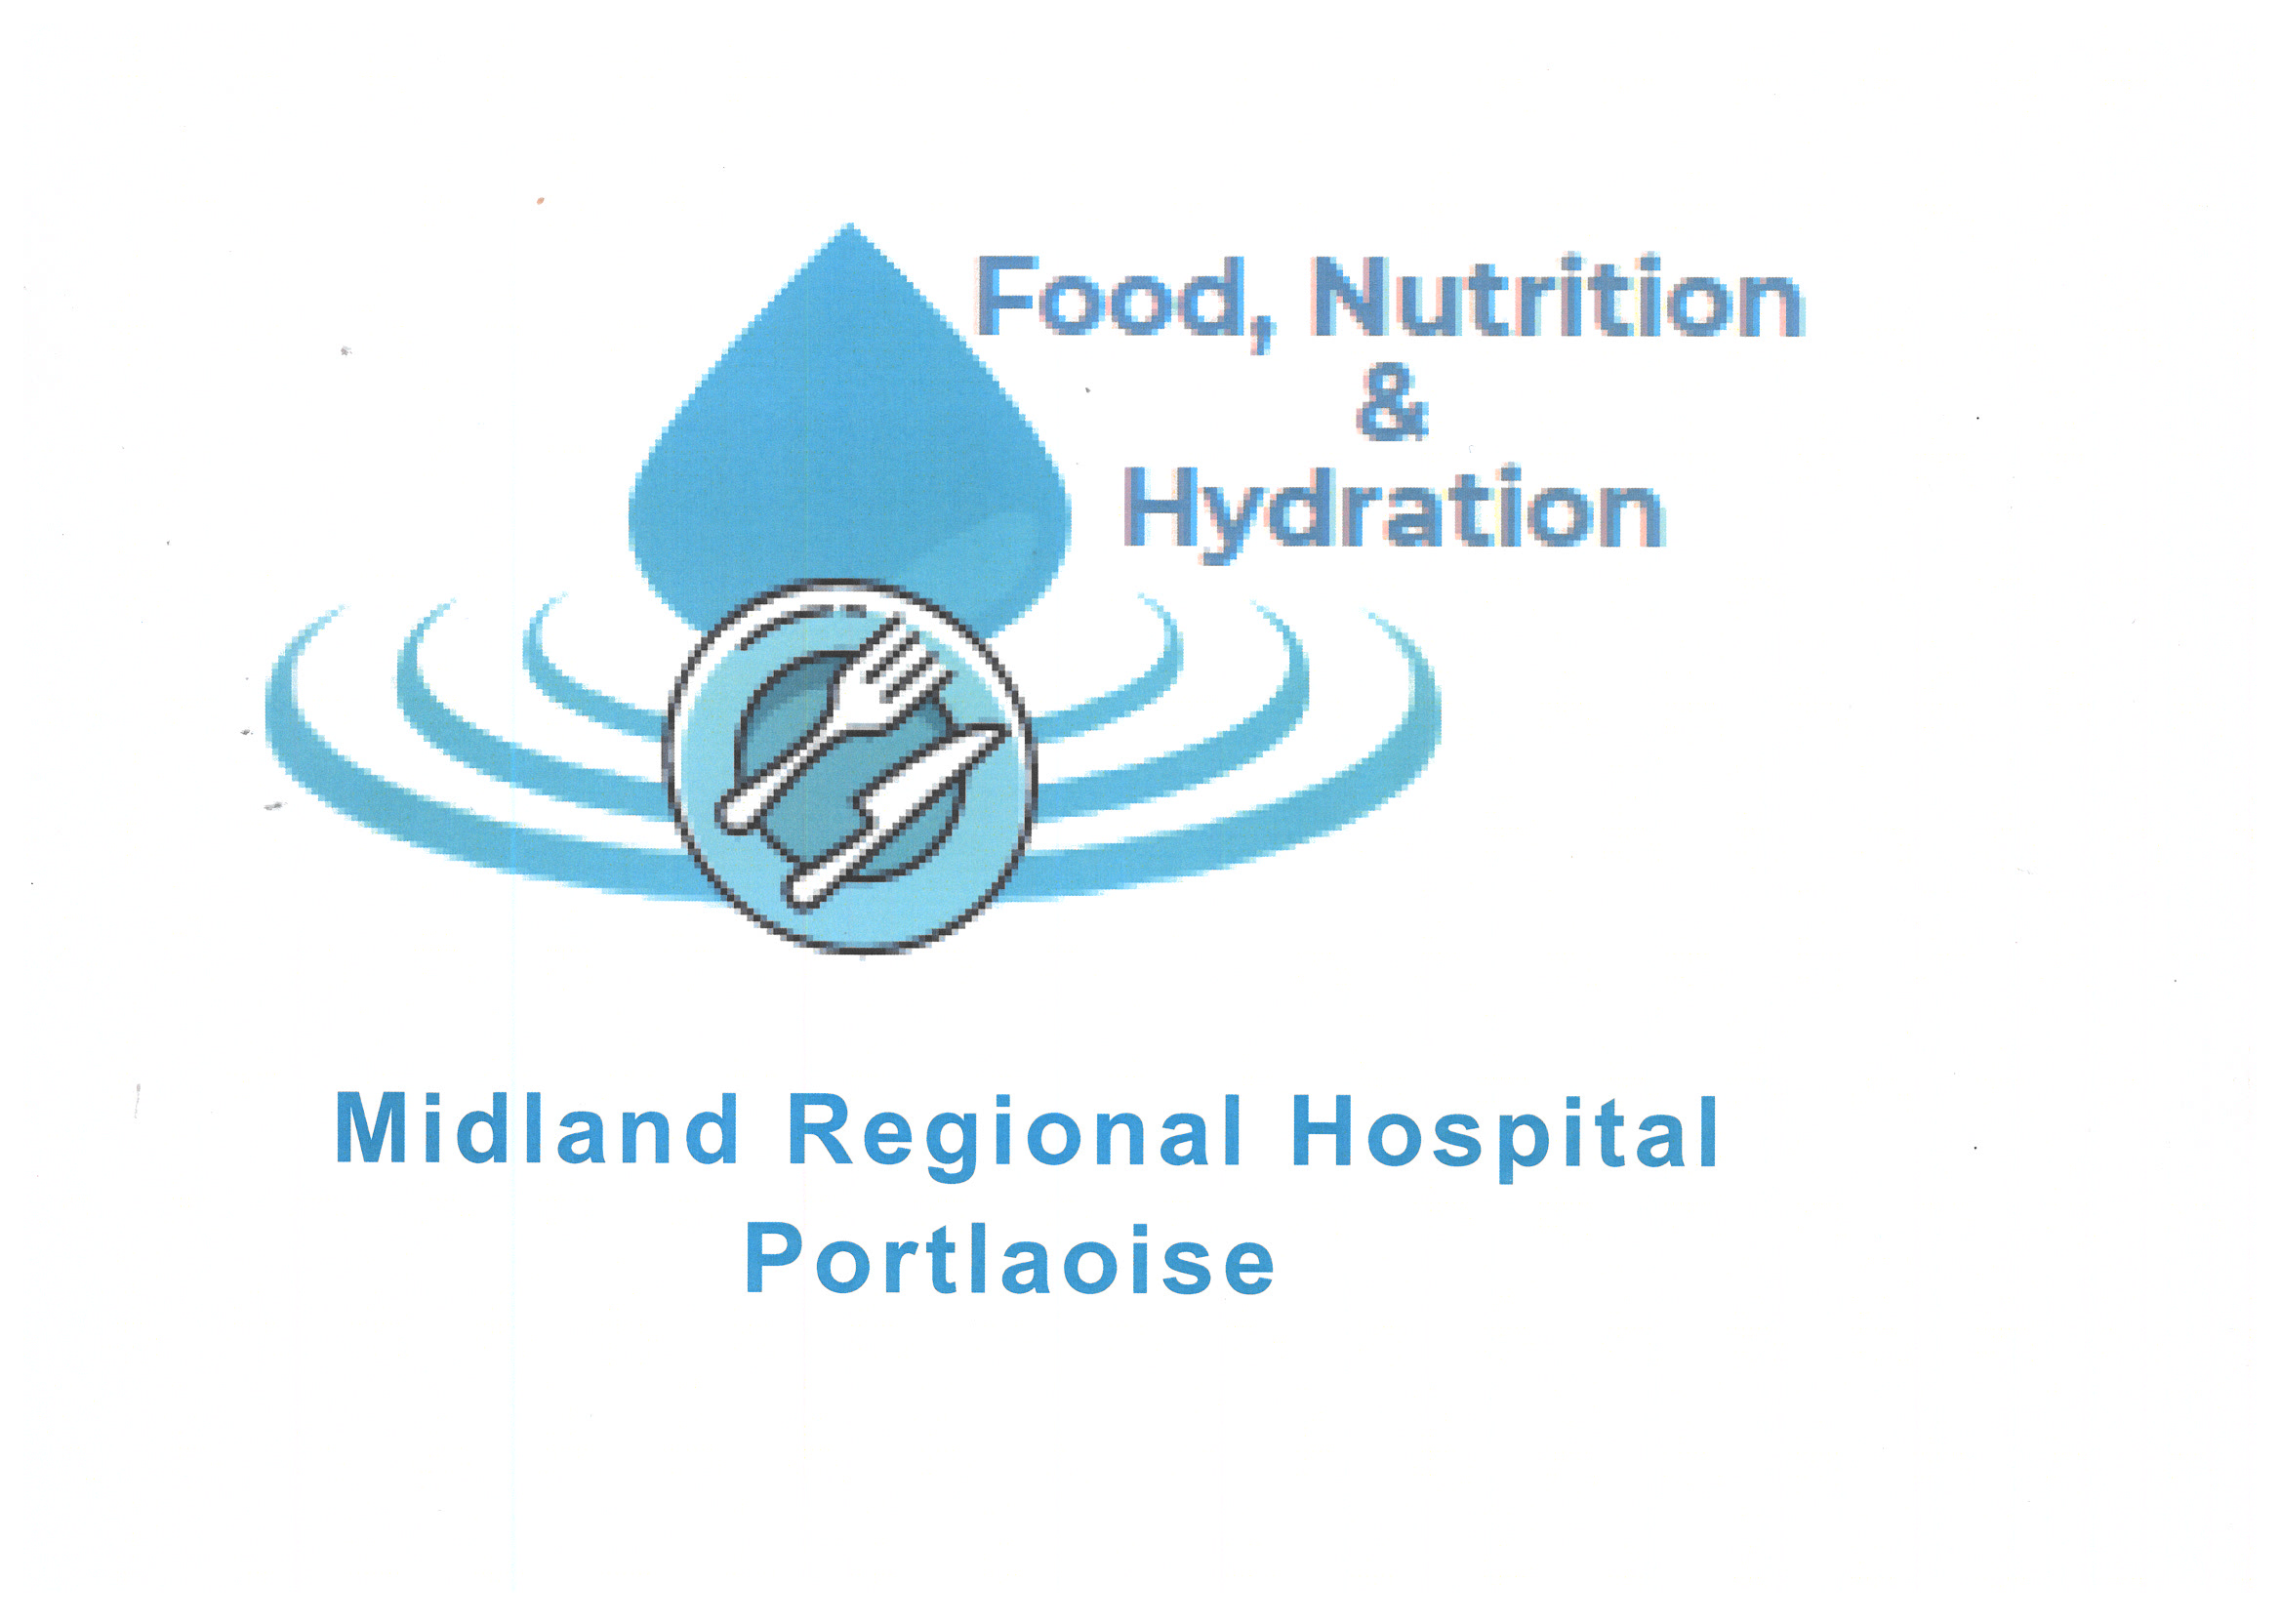 MRHP nutrition and hydration logo